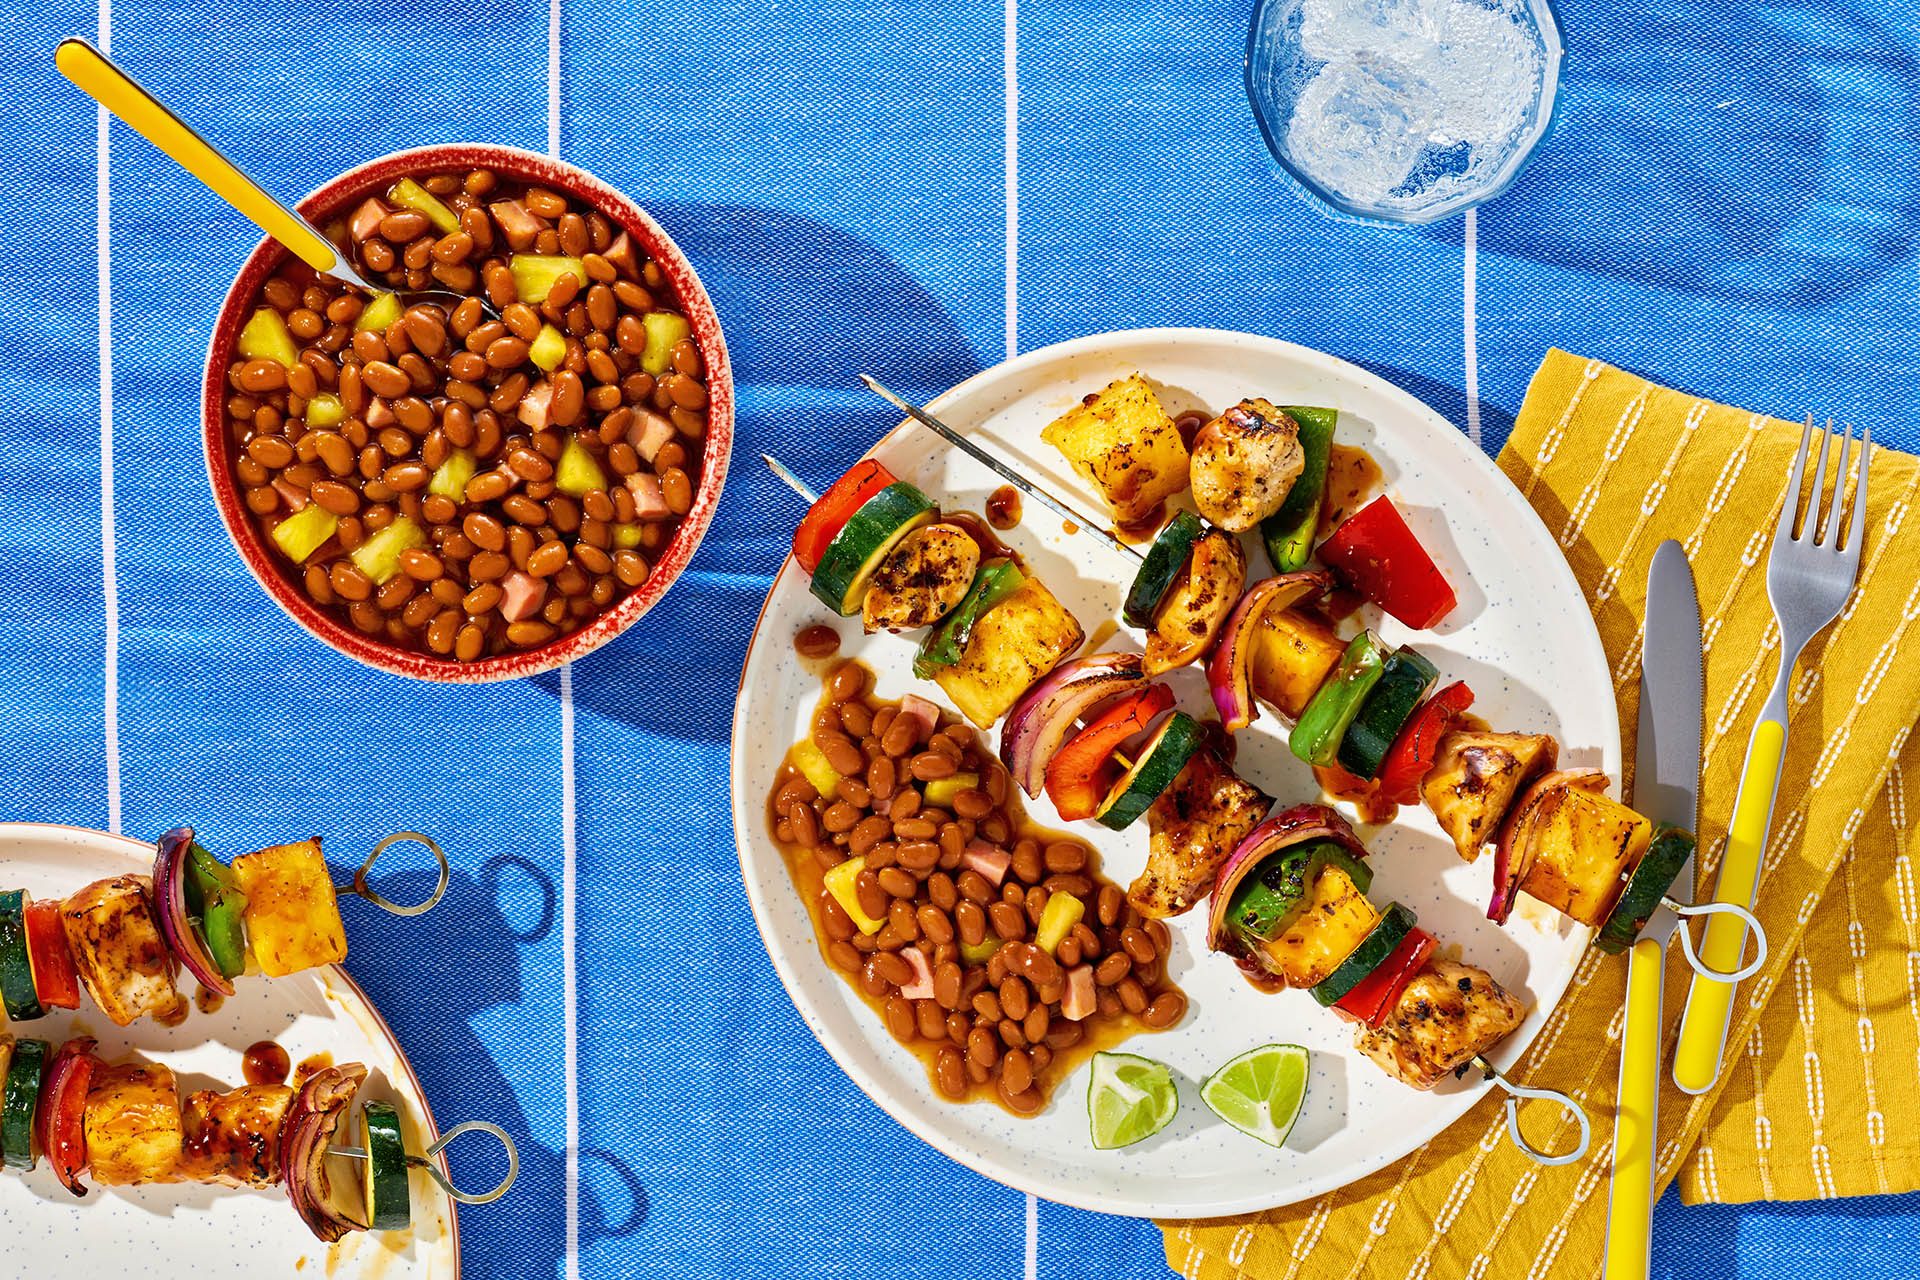 A bowl of Hawaiian-style baked beans with pineapple and a platter of grilled kabobs.